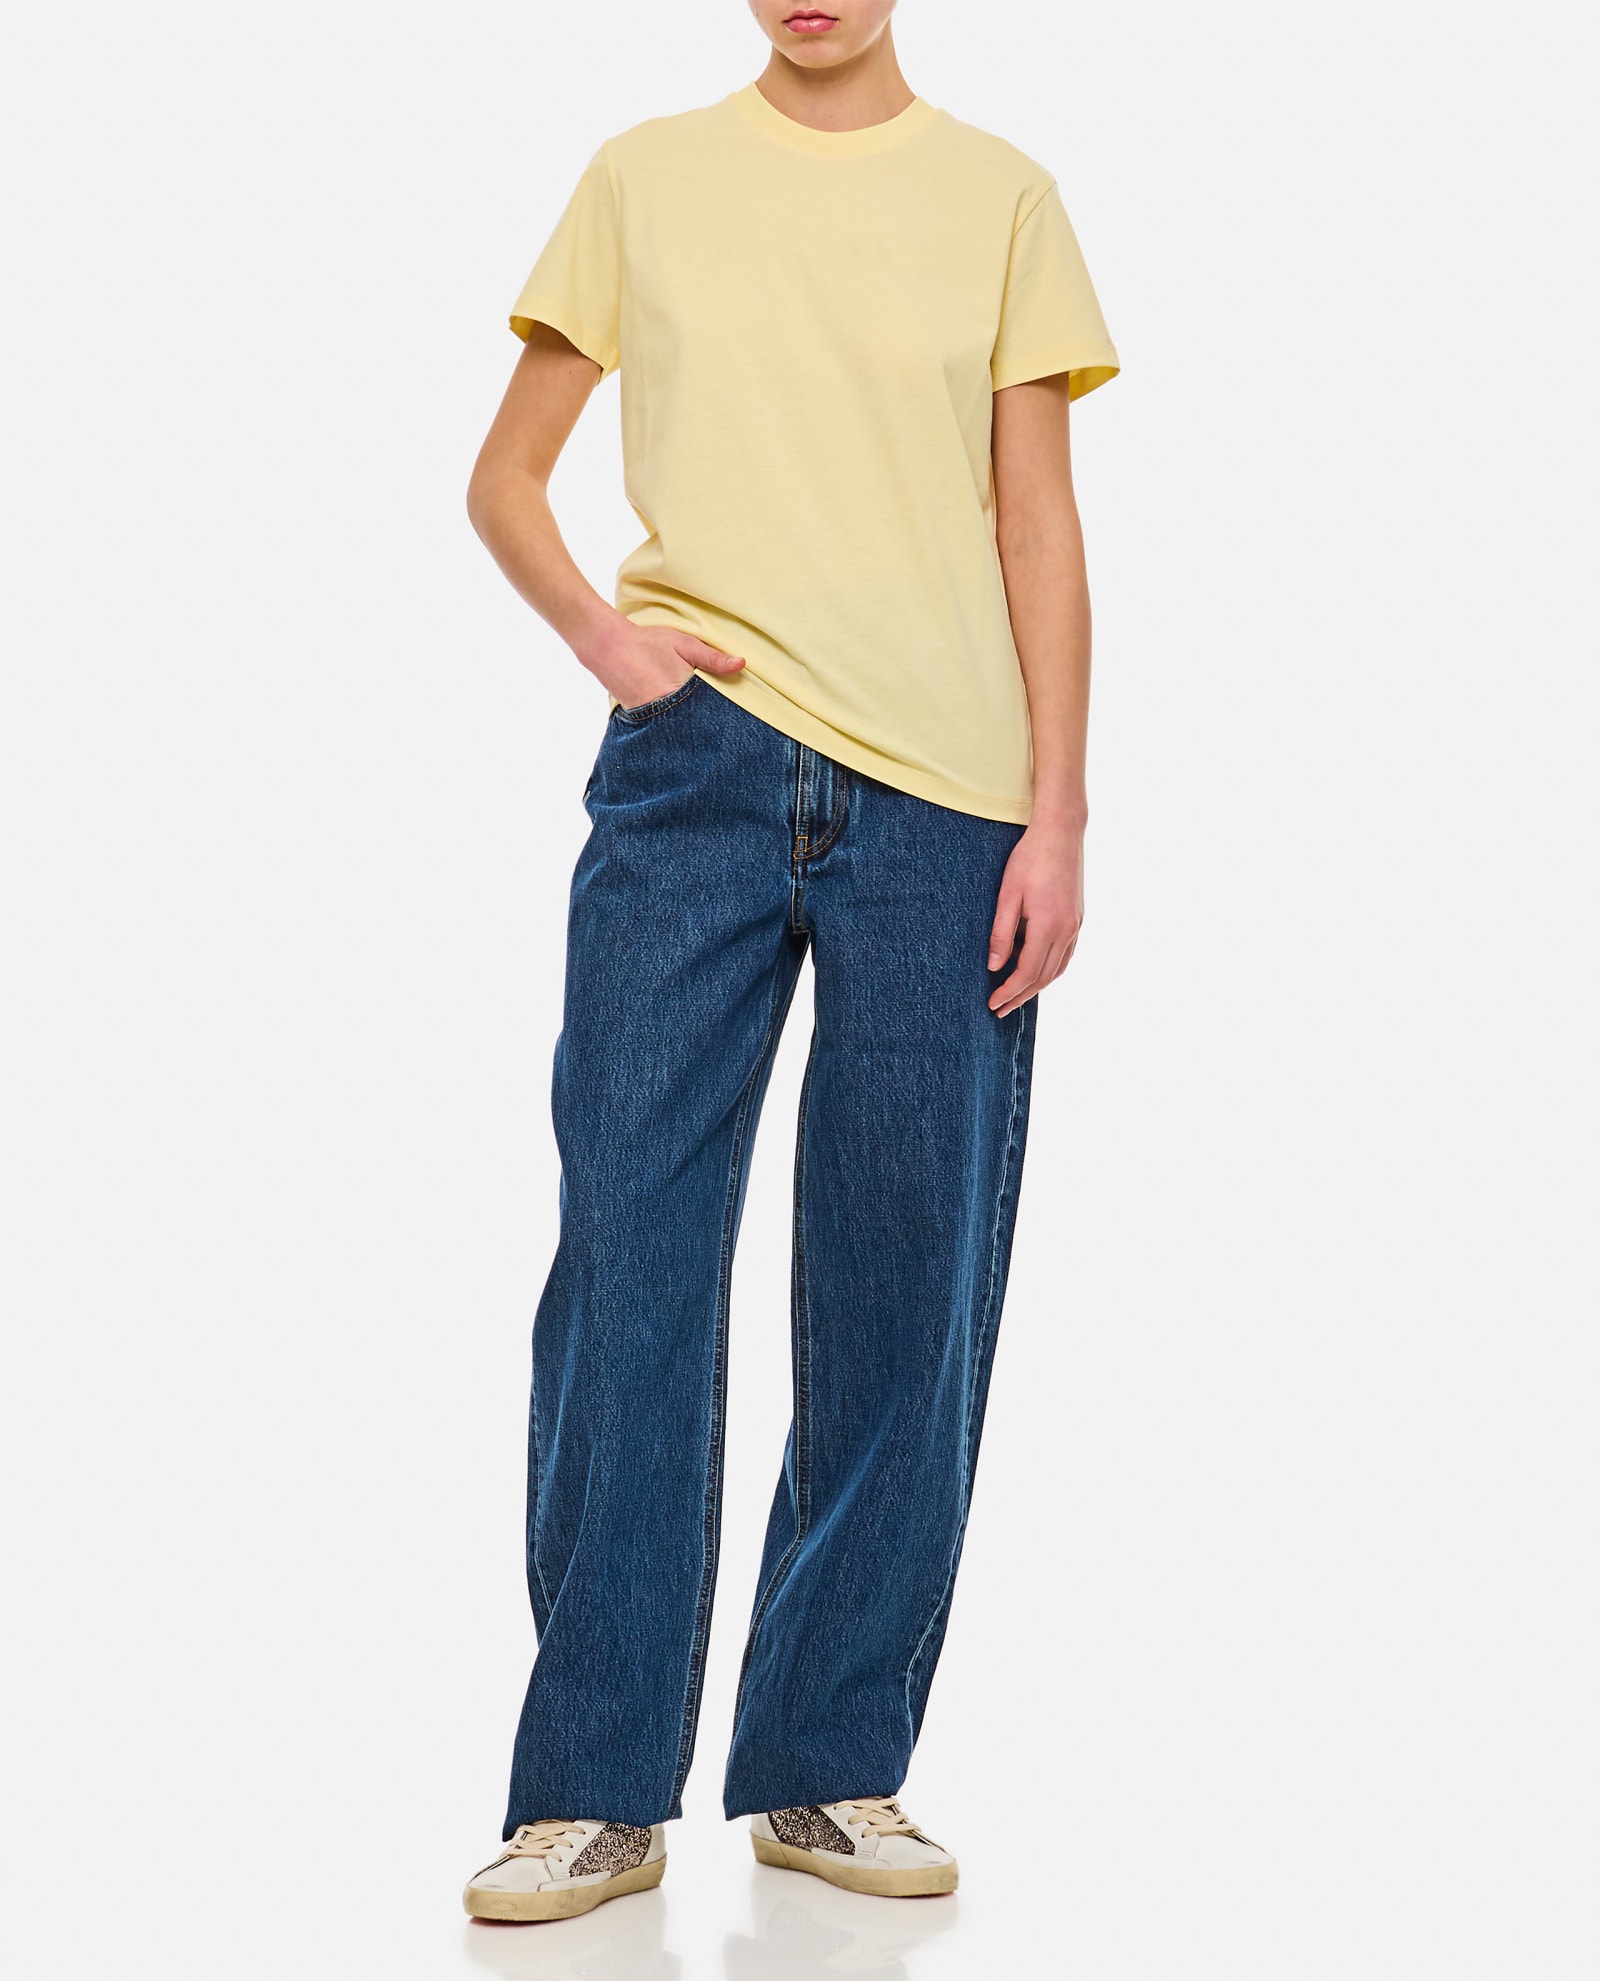 Loulou Studio Denim Trousers In Washed Blue